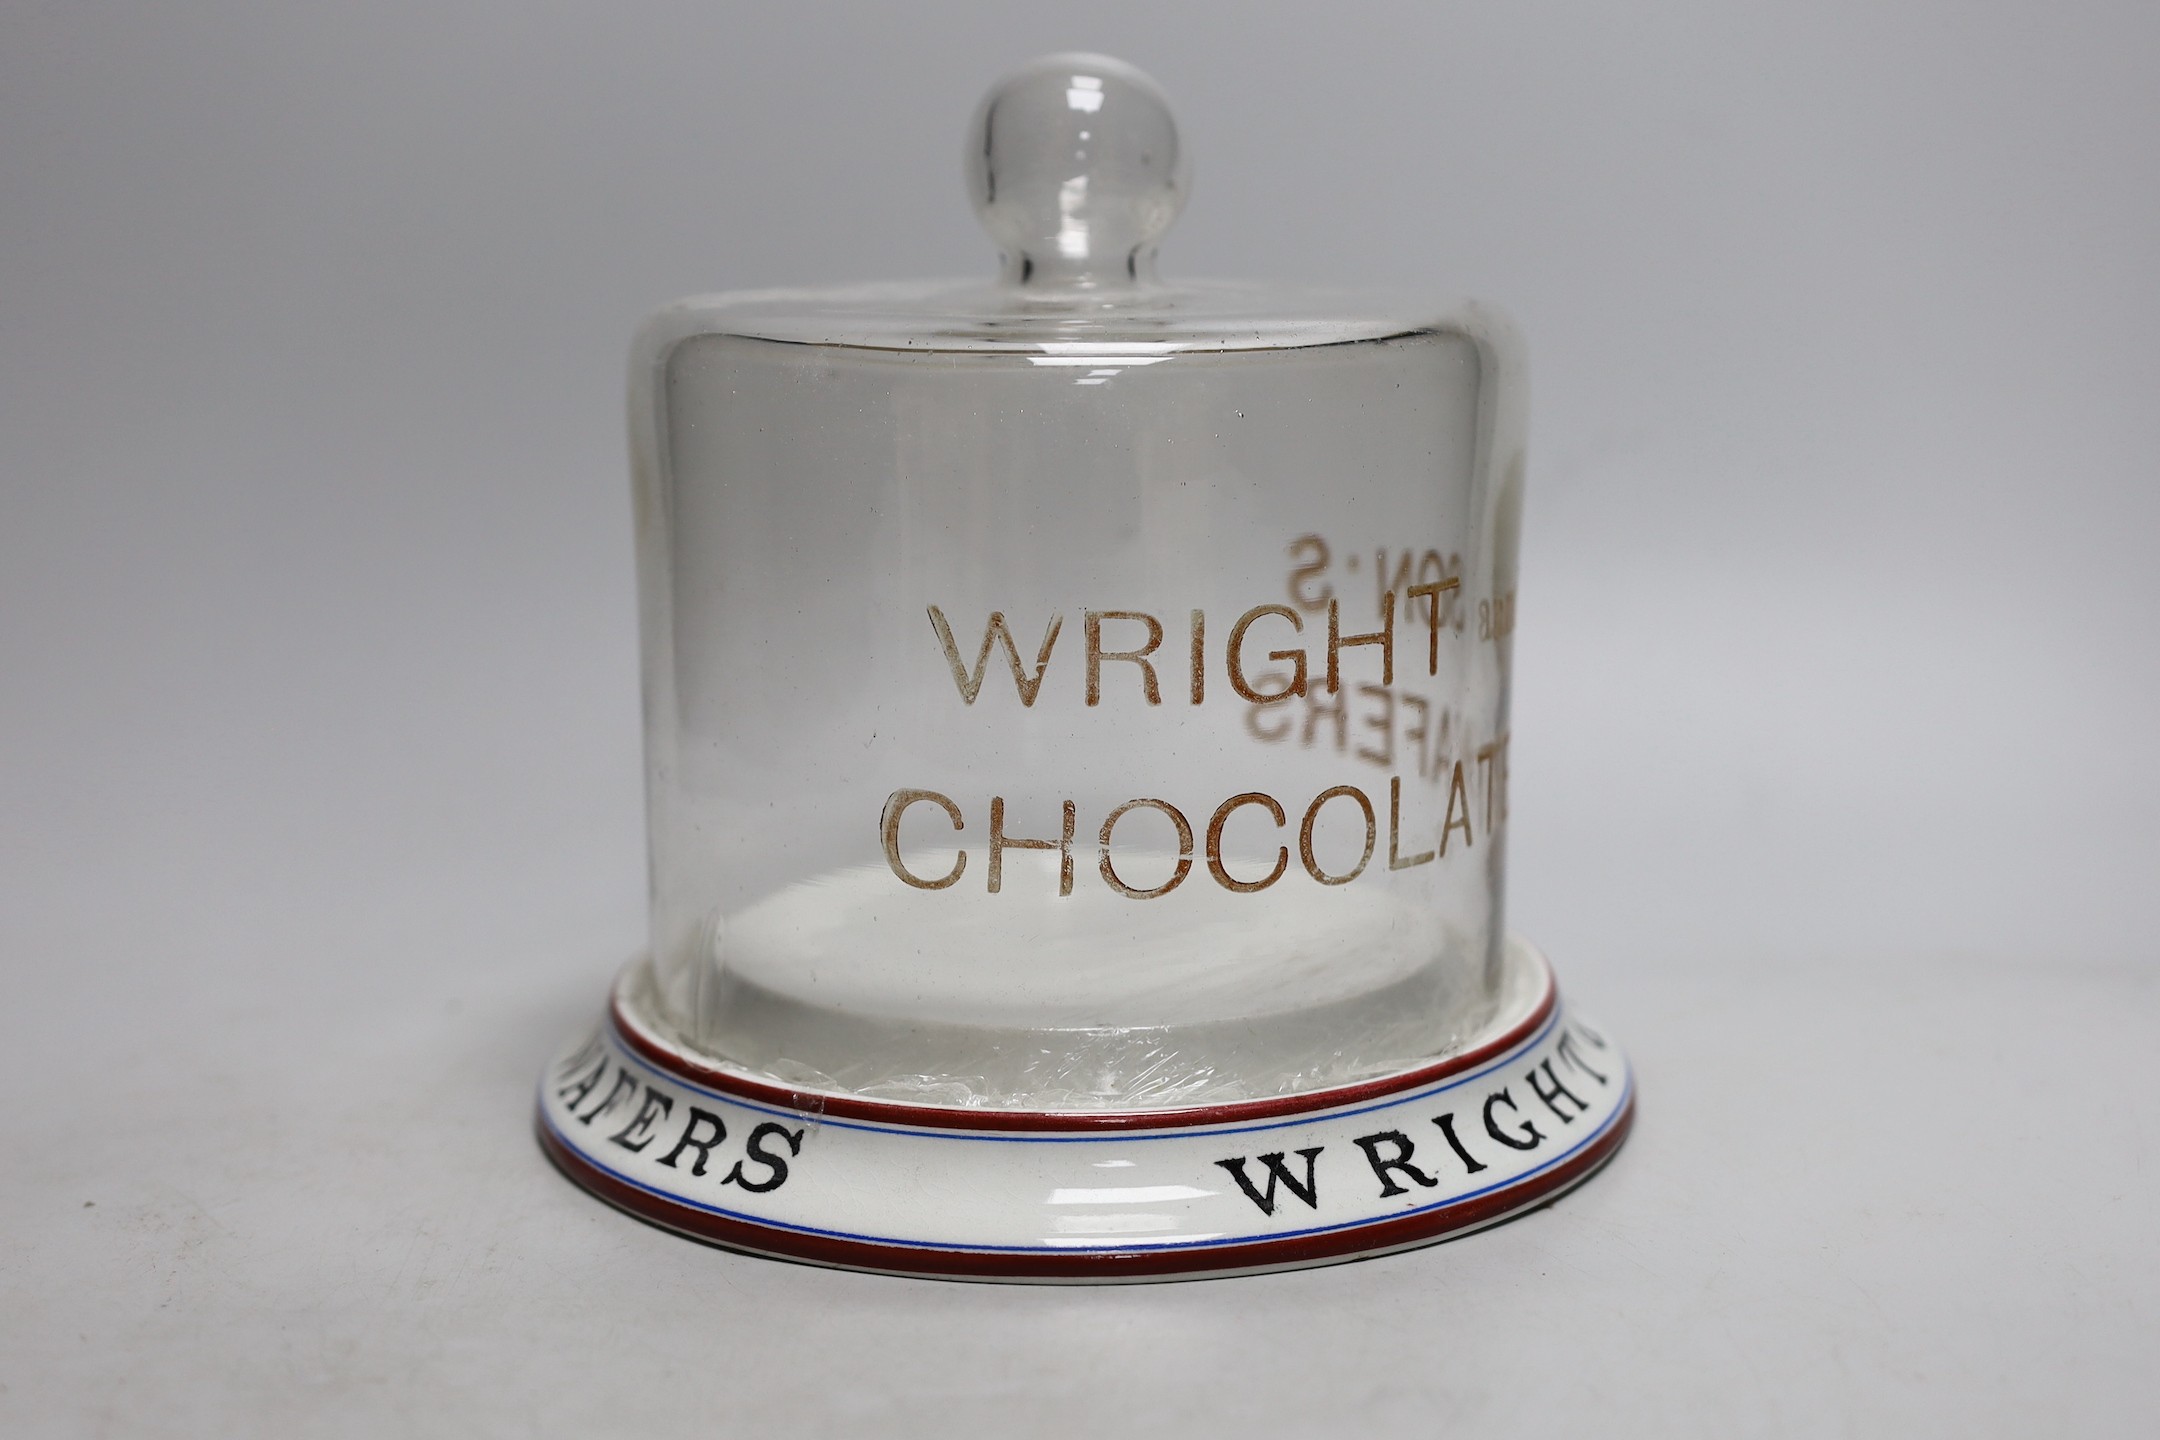 A Wright & Son’s Wafers display pottery stand with glass dome. 19cm tall overall